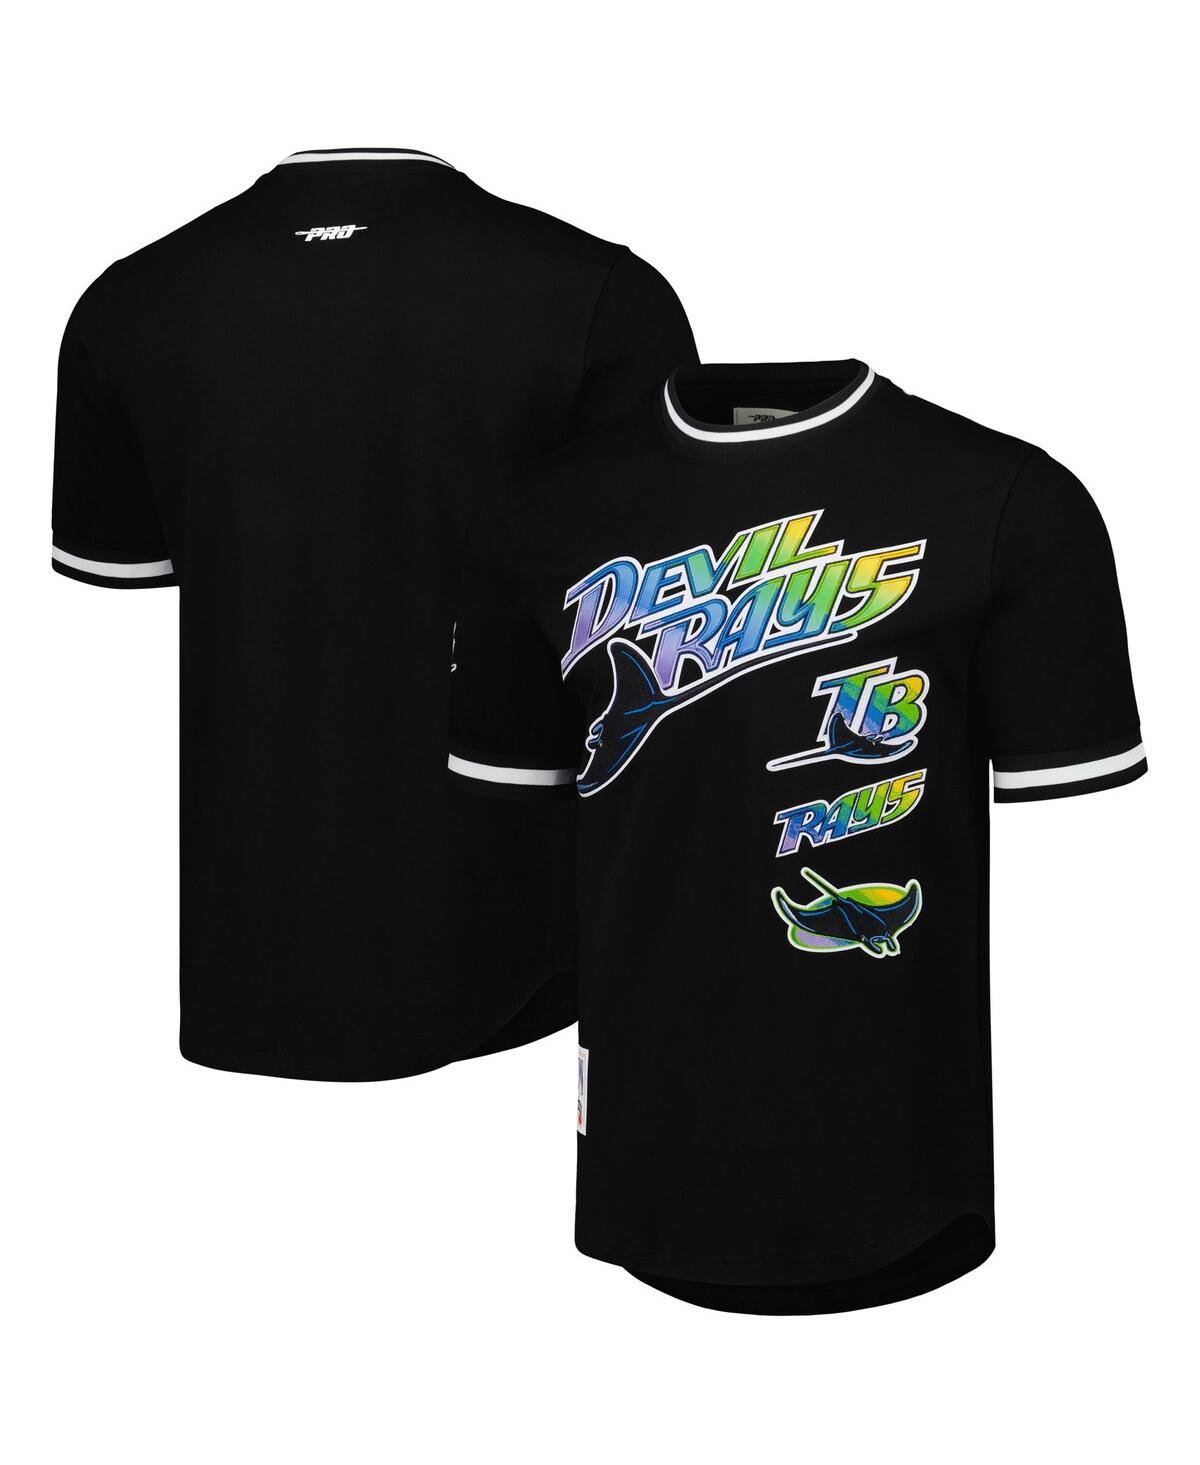 Pro Standard Men's  Black Tampa Bay Rays Cooperstown Collection Retro Classic T-shirt